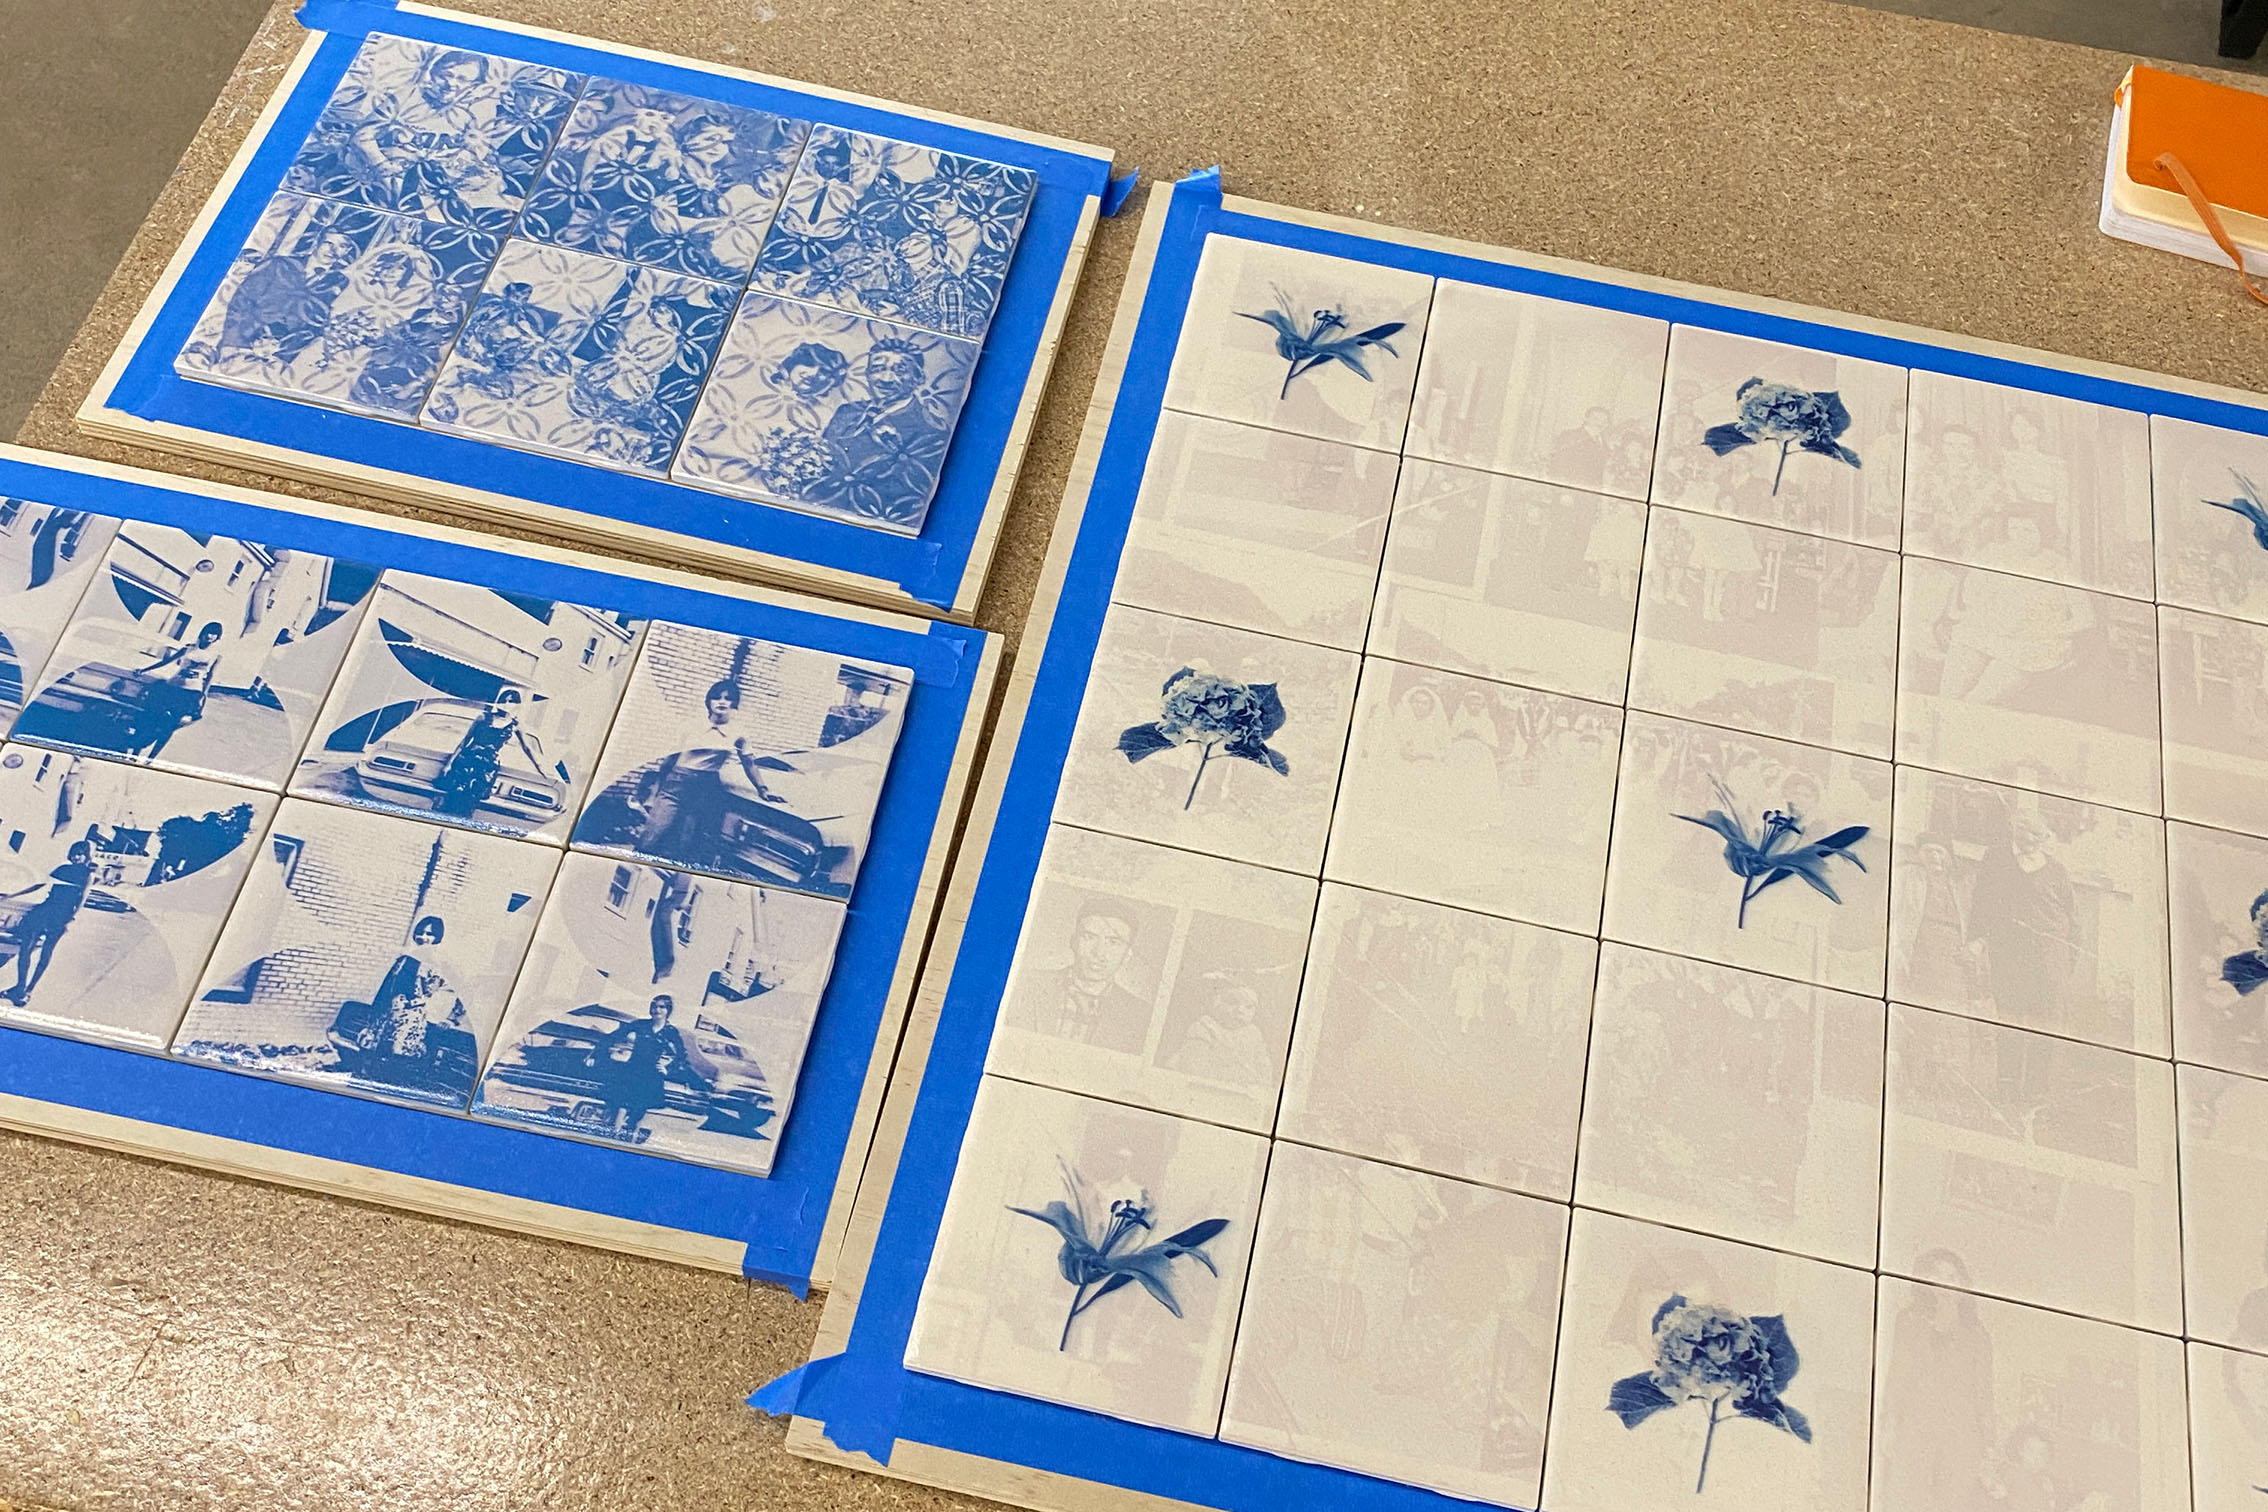 An array of tiles placed on top of boards surrounded by blue painters tape. some tiles have blue images printed on their surface.